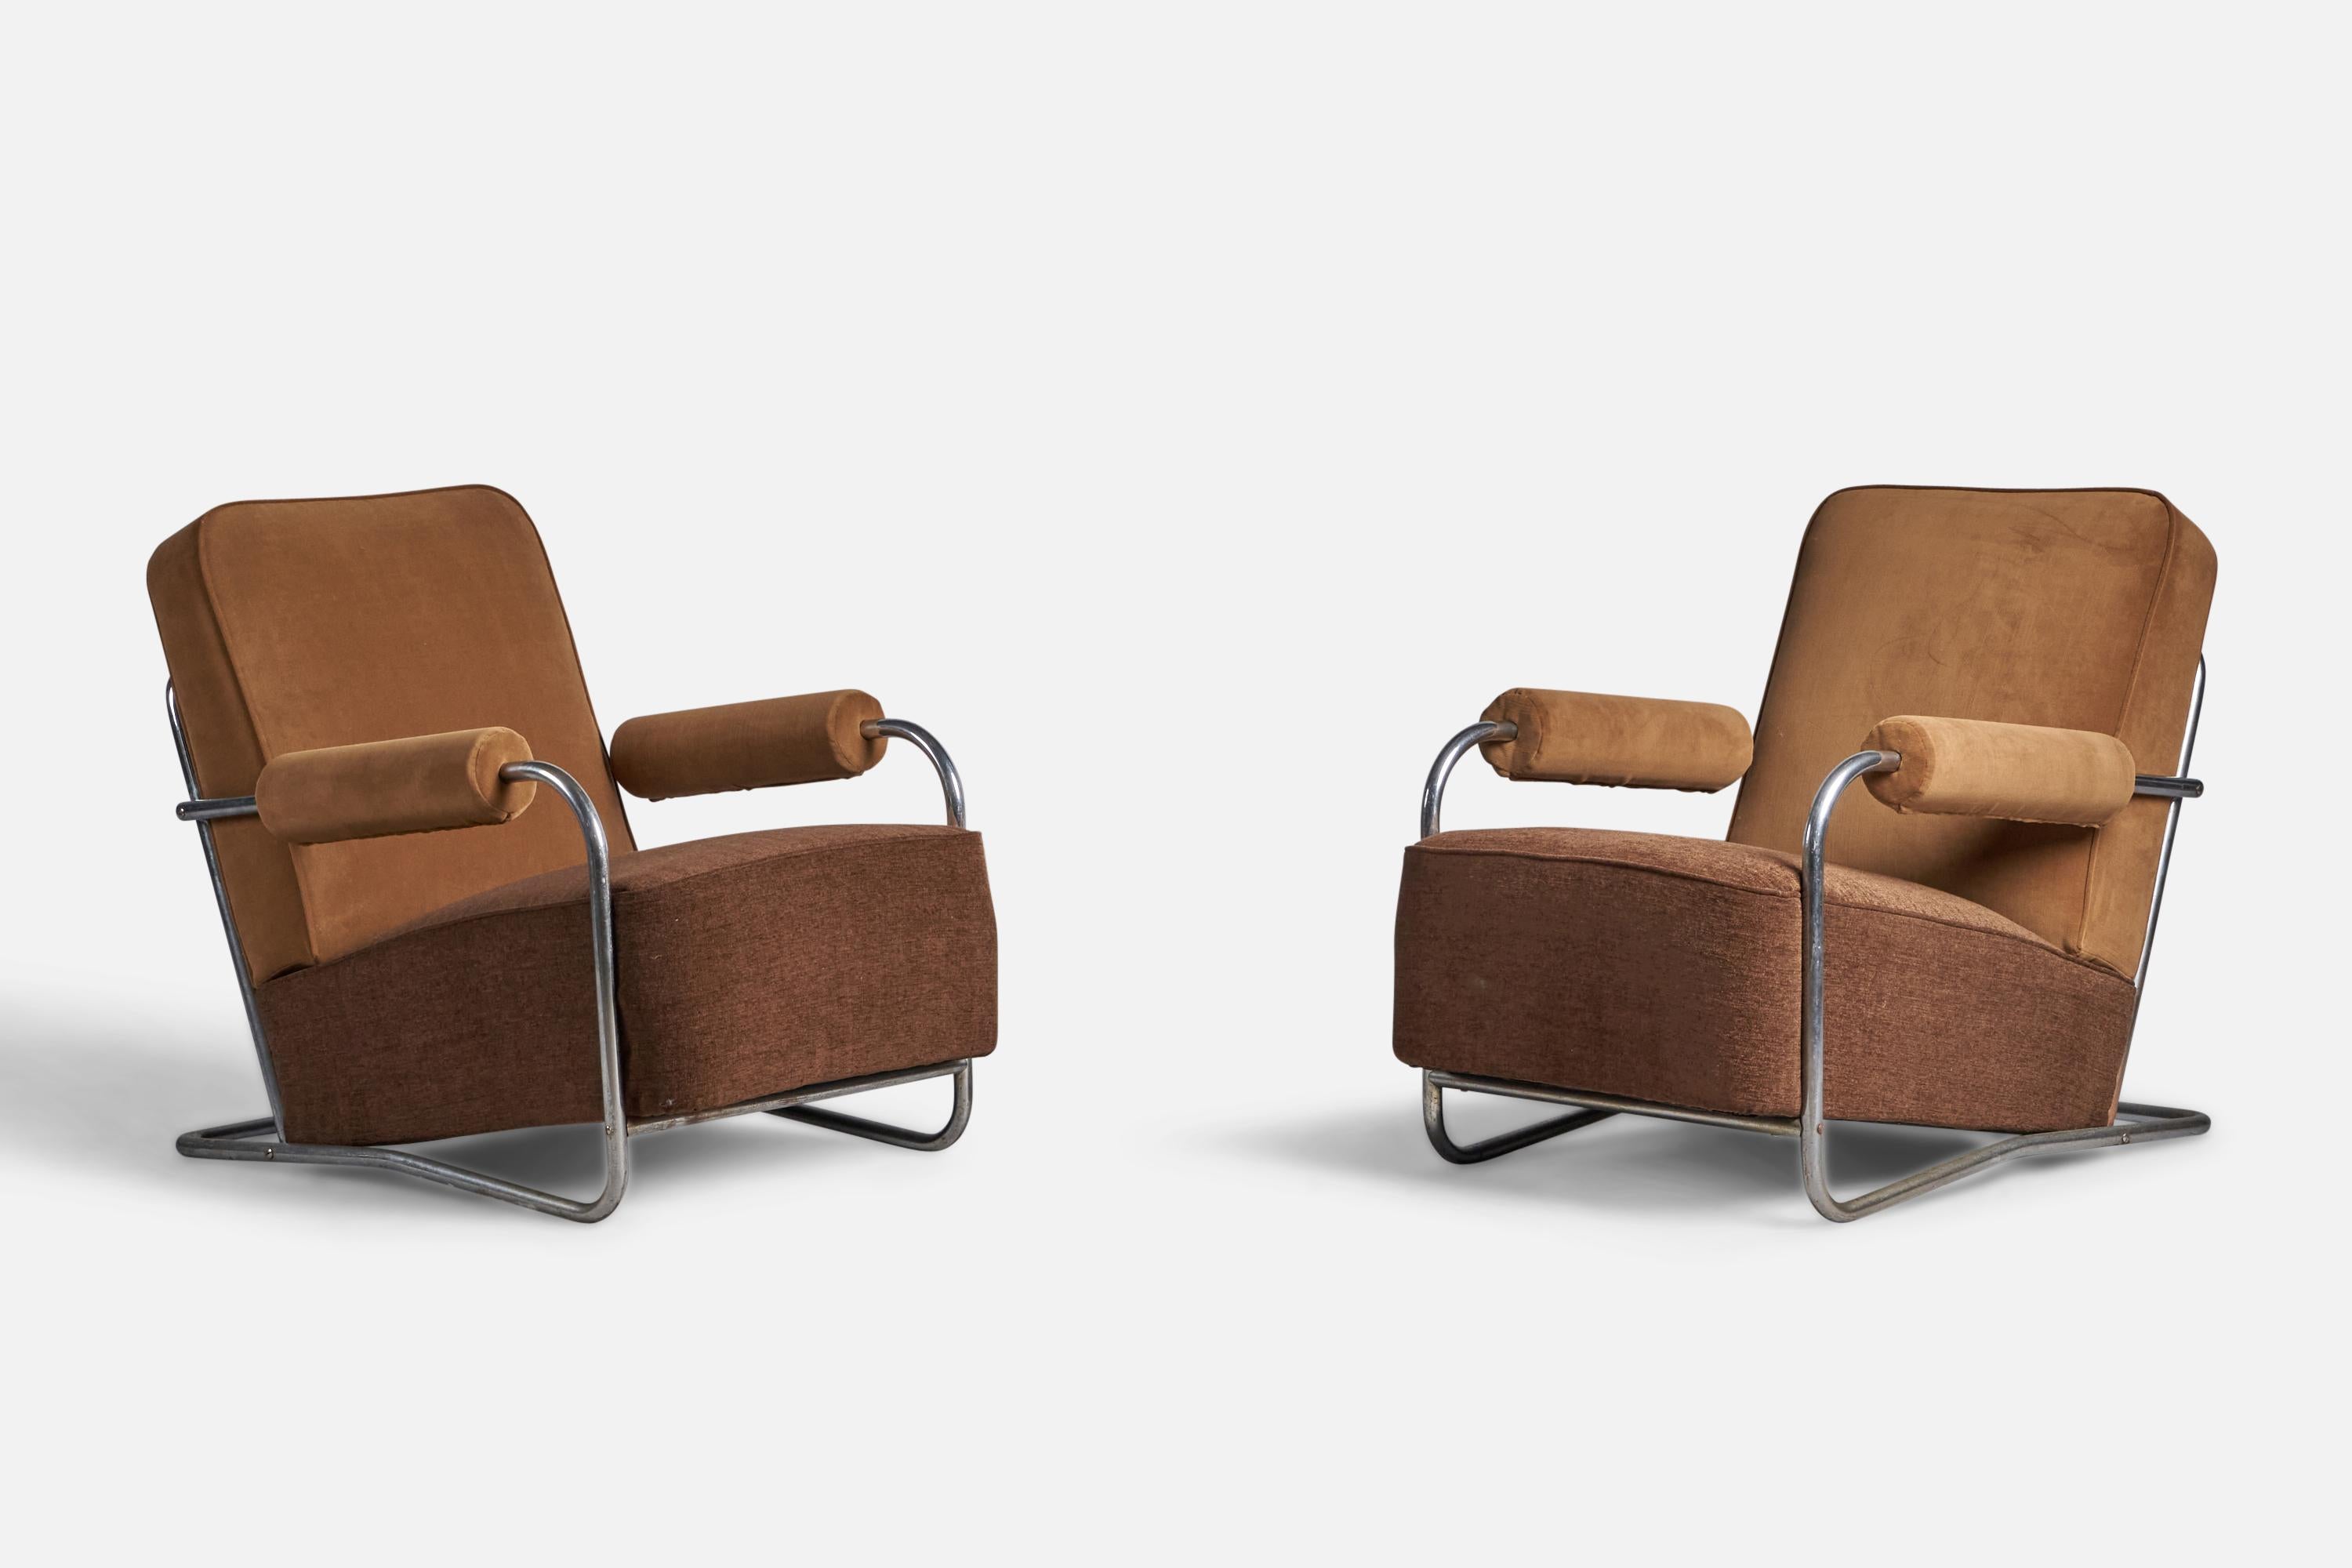 A pair of tubular steel, brown fabric and beige velvet lounge chairs, designed and produced in the US, 1930s.

17” seat height